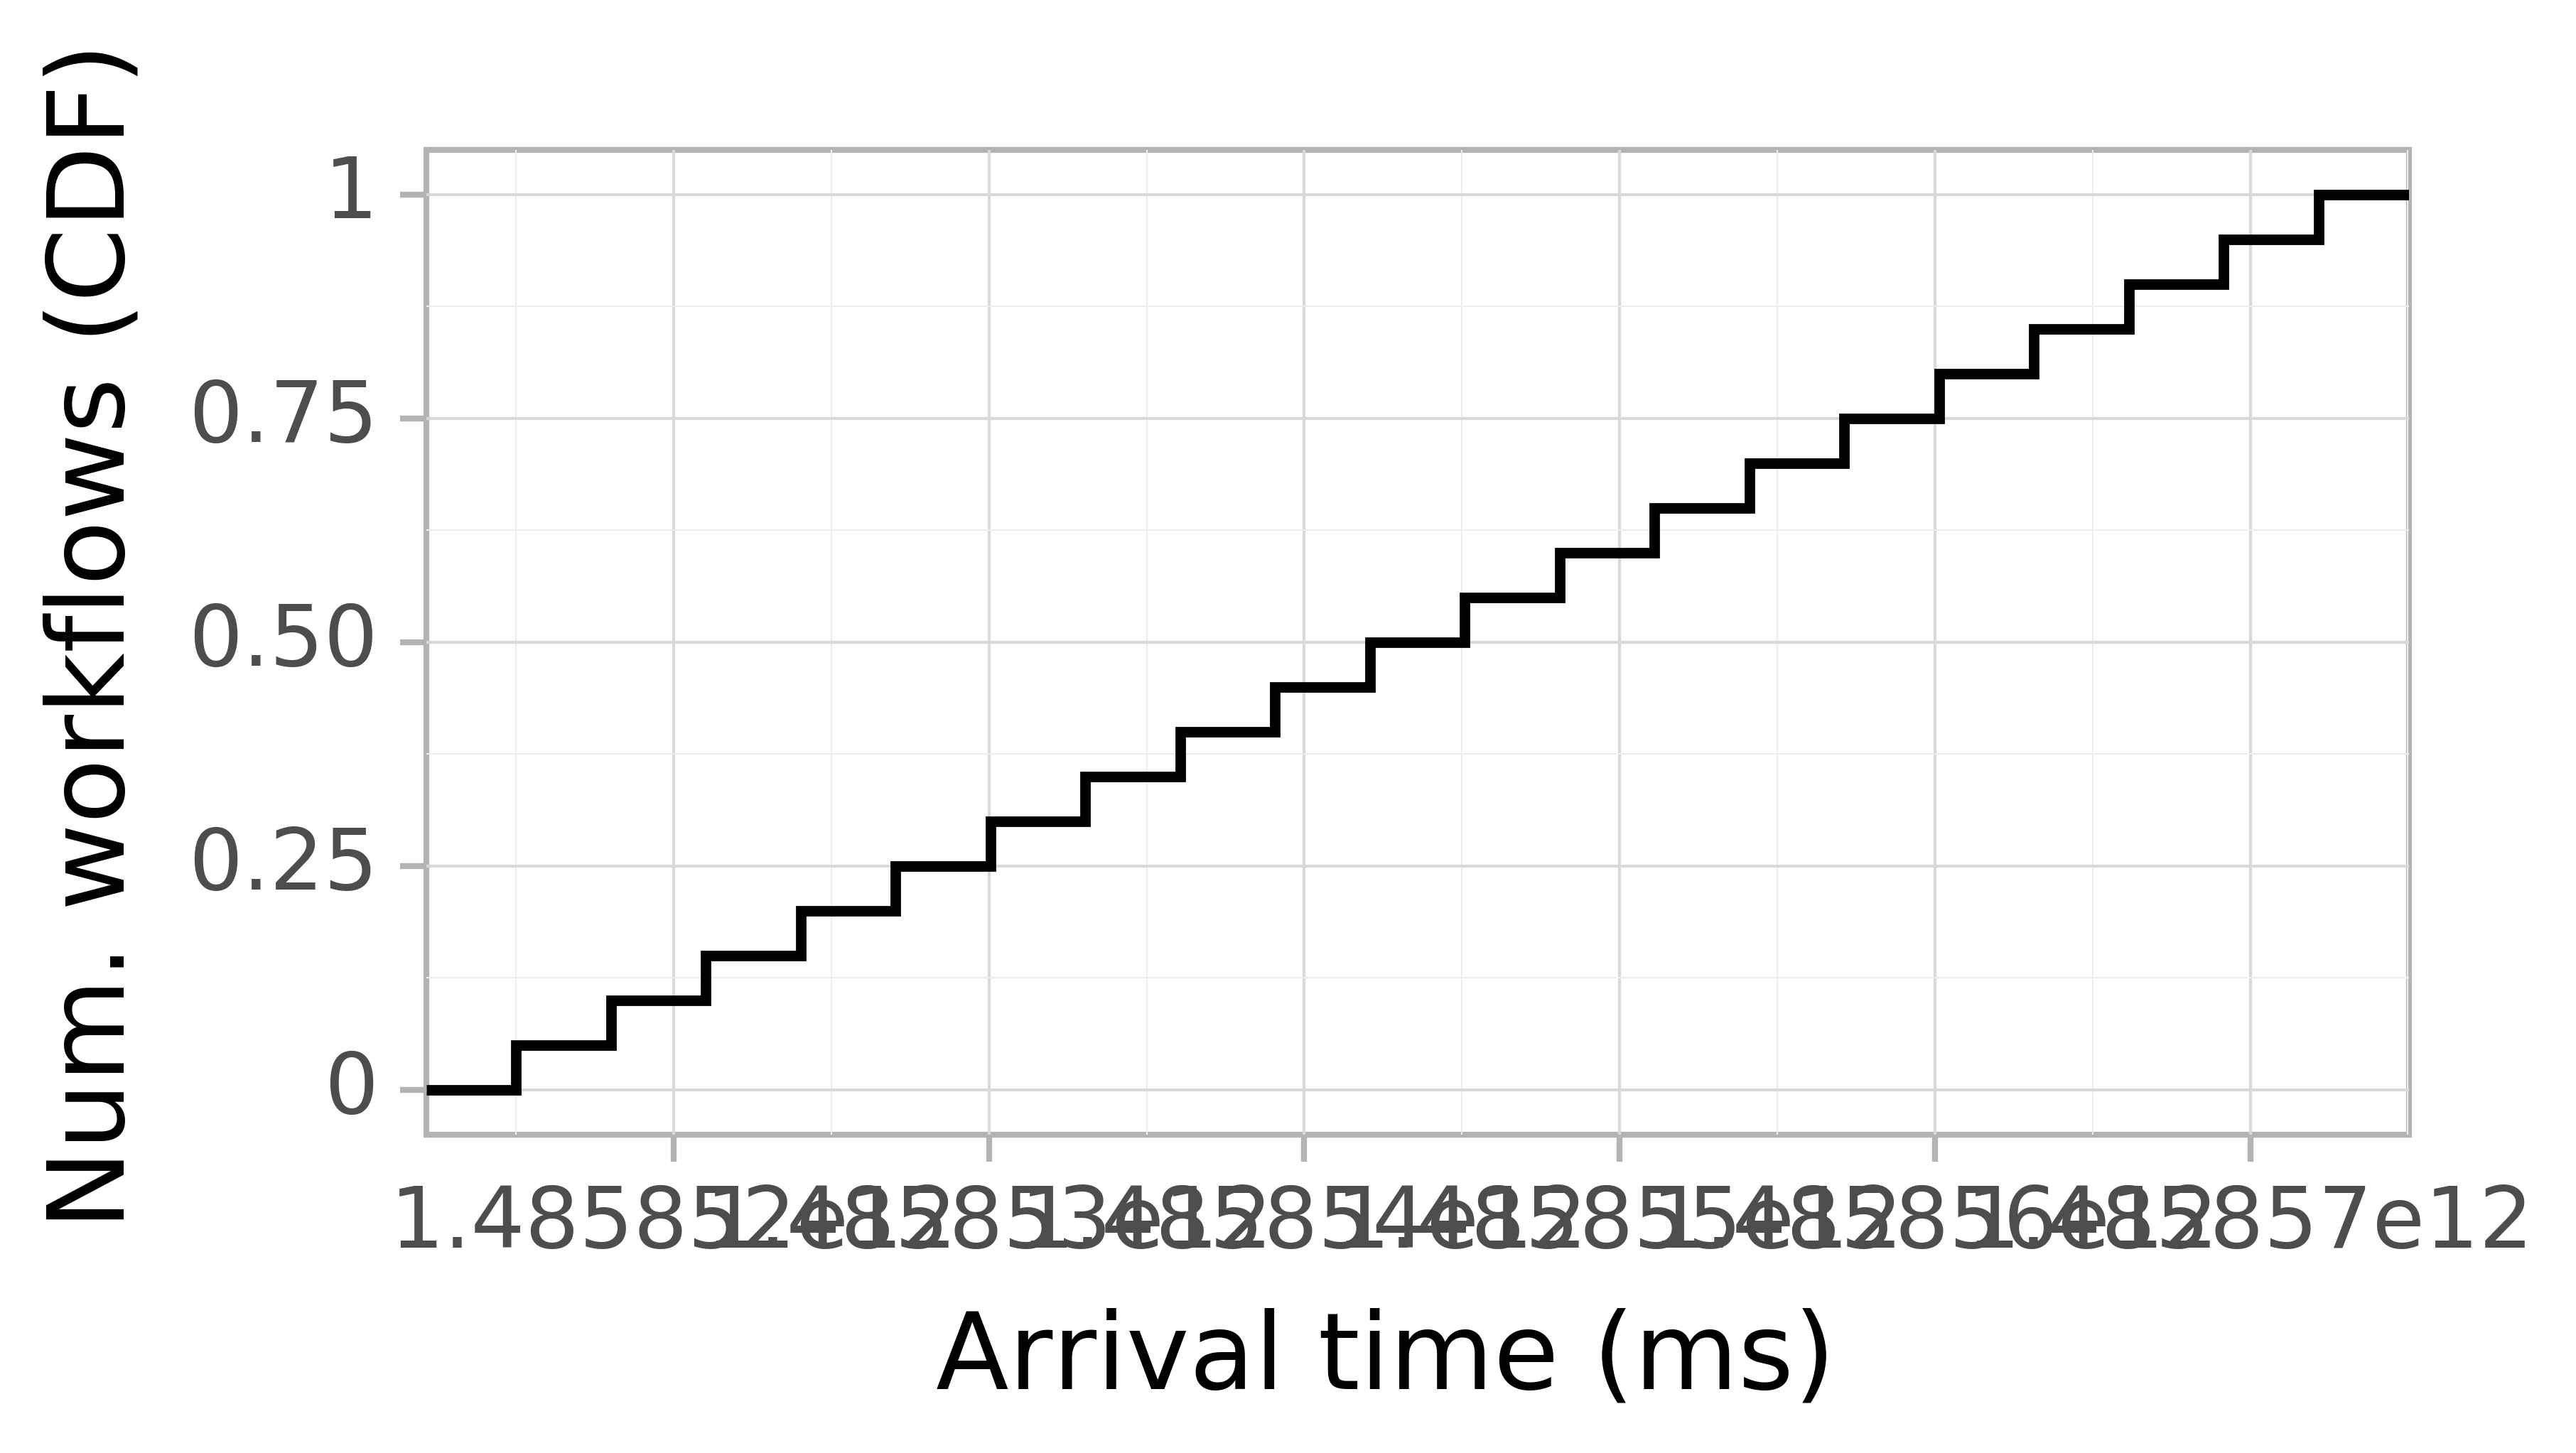 Job arrival CDF graph for the askalon-new_ee18 trace.